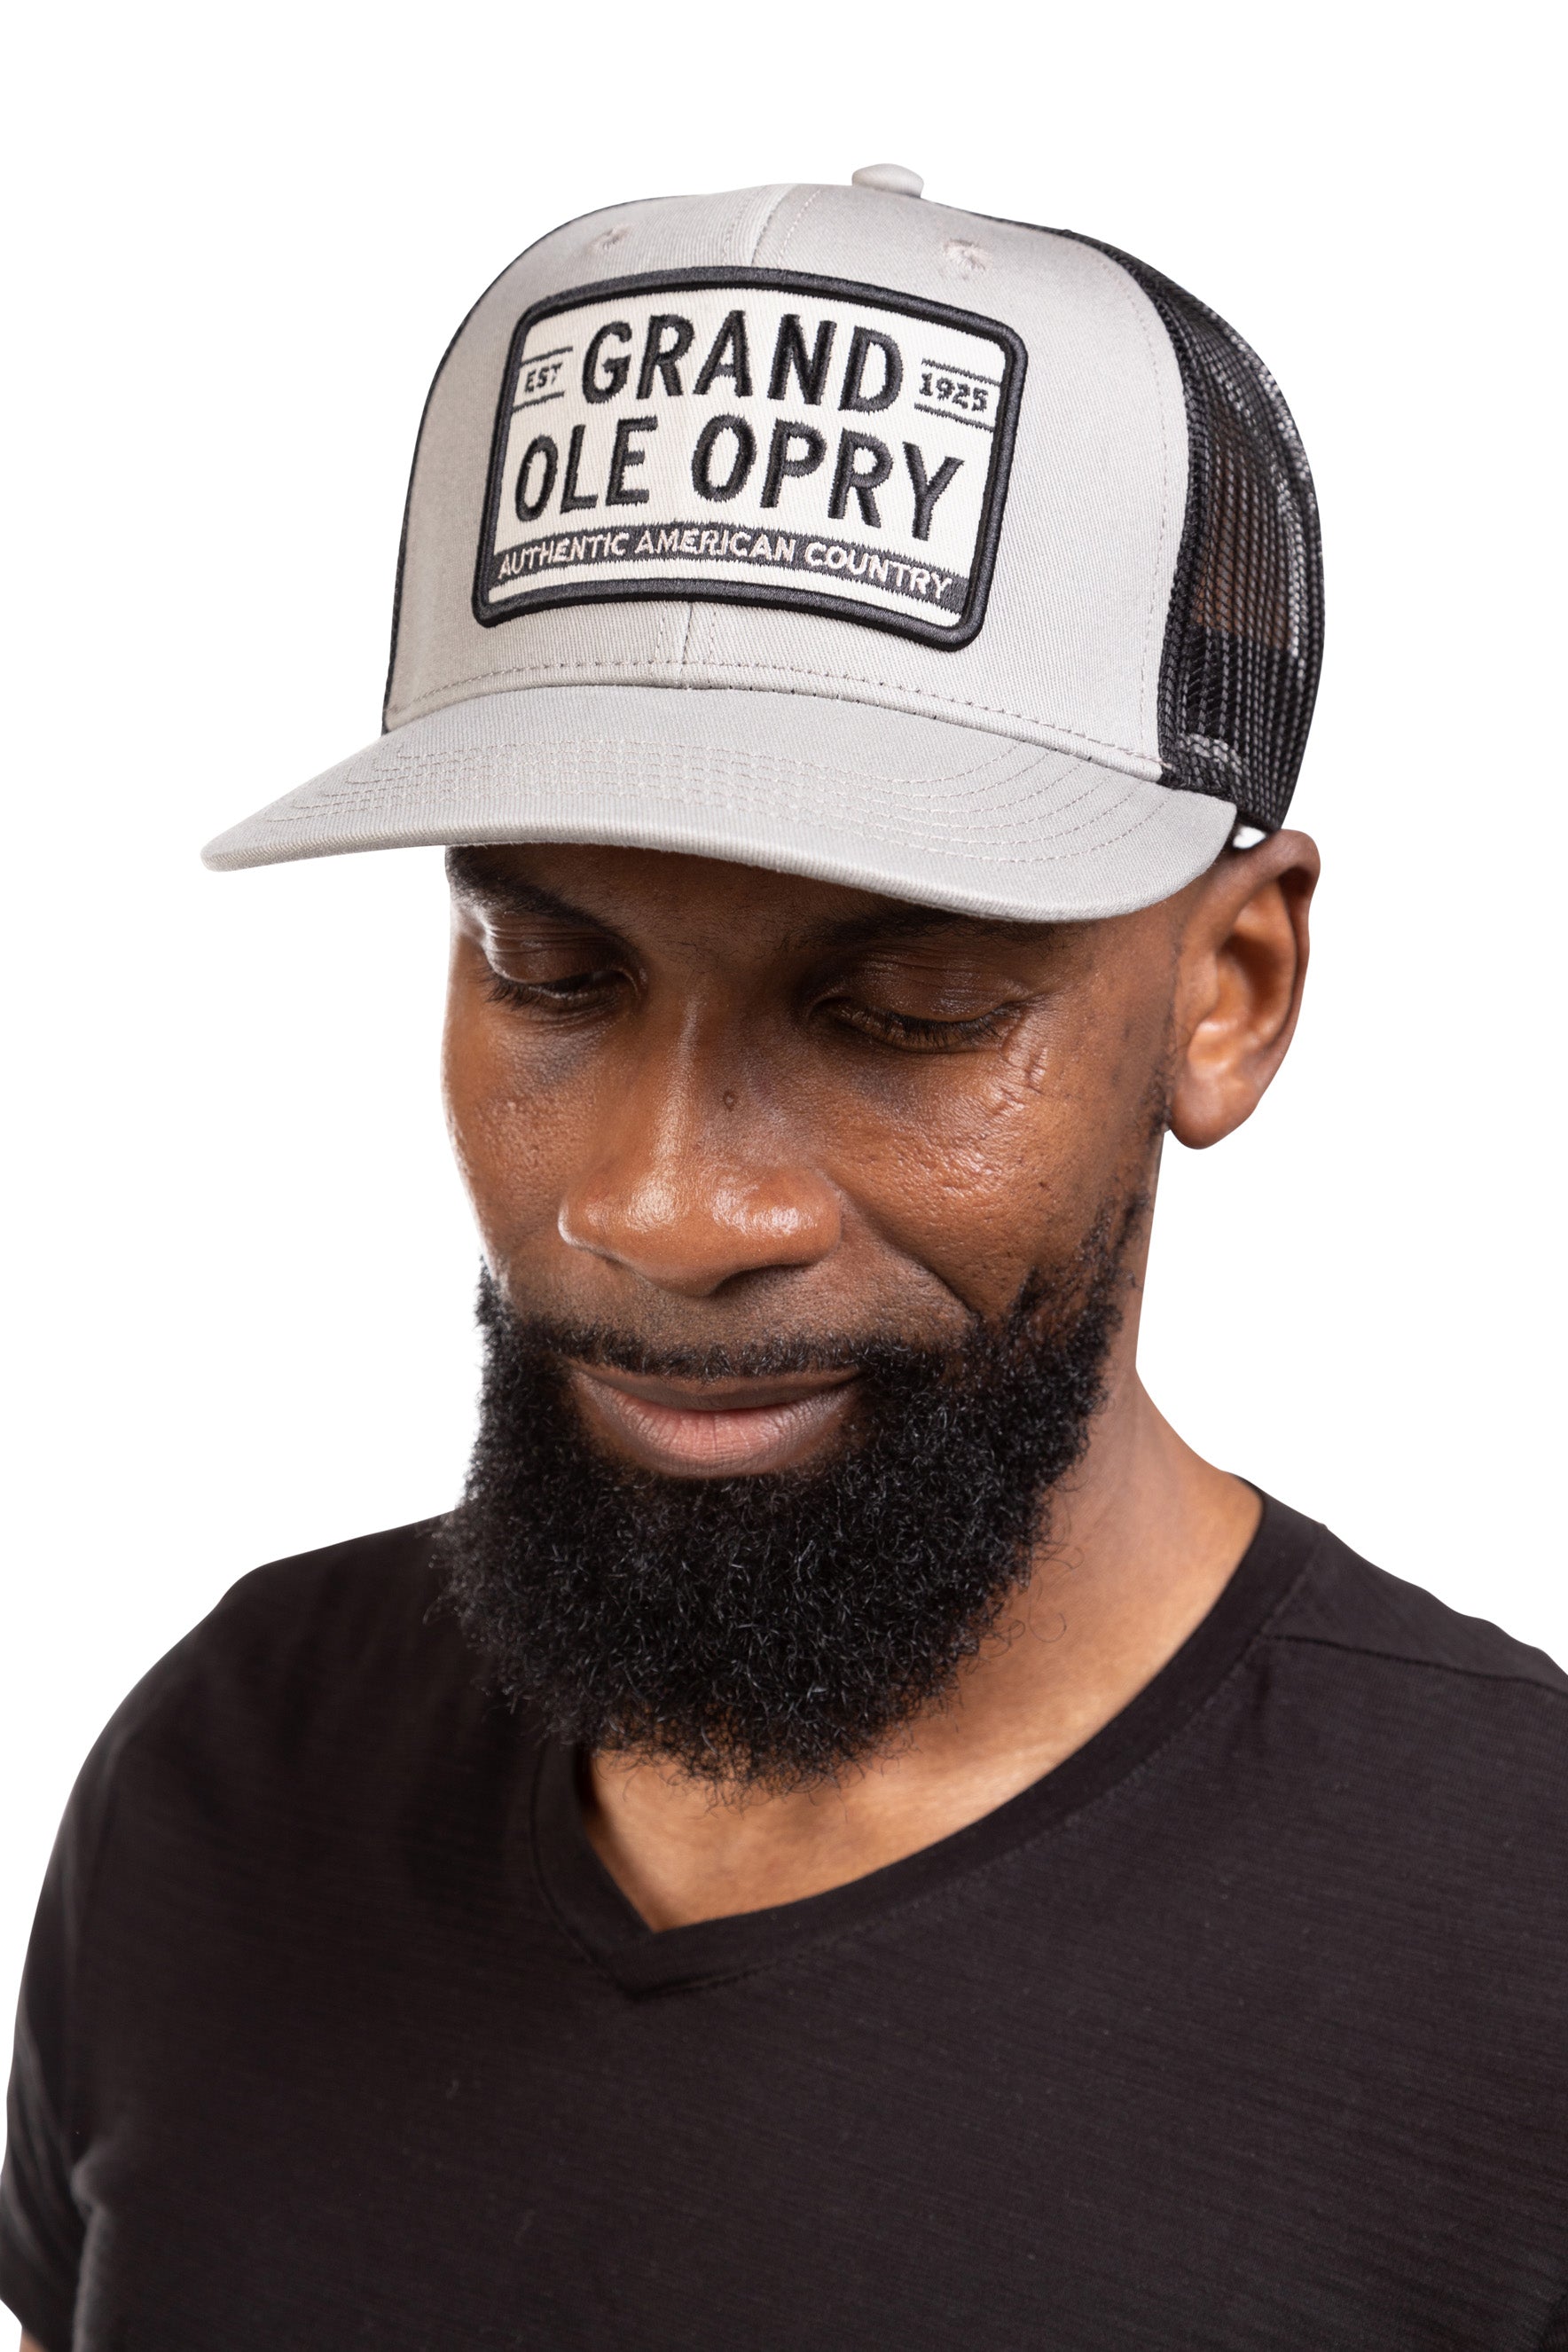 Opry Authentic American Country Mesh Cap